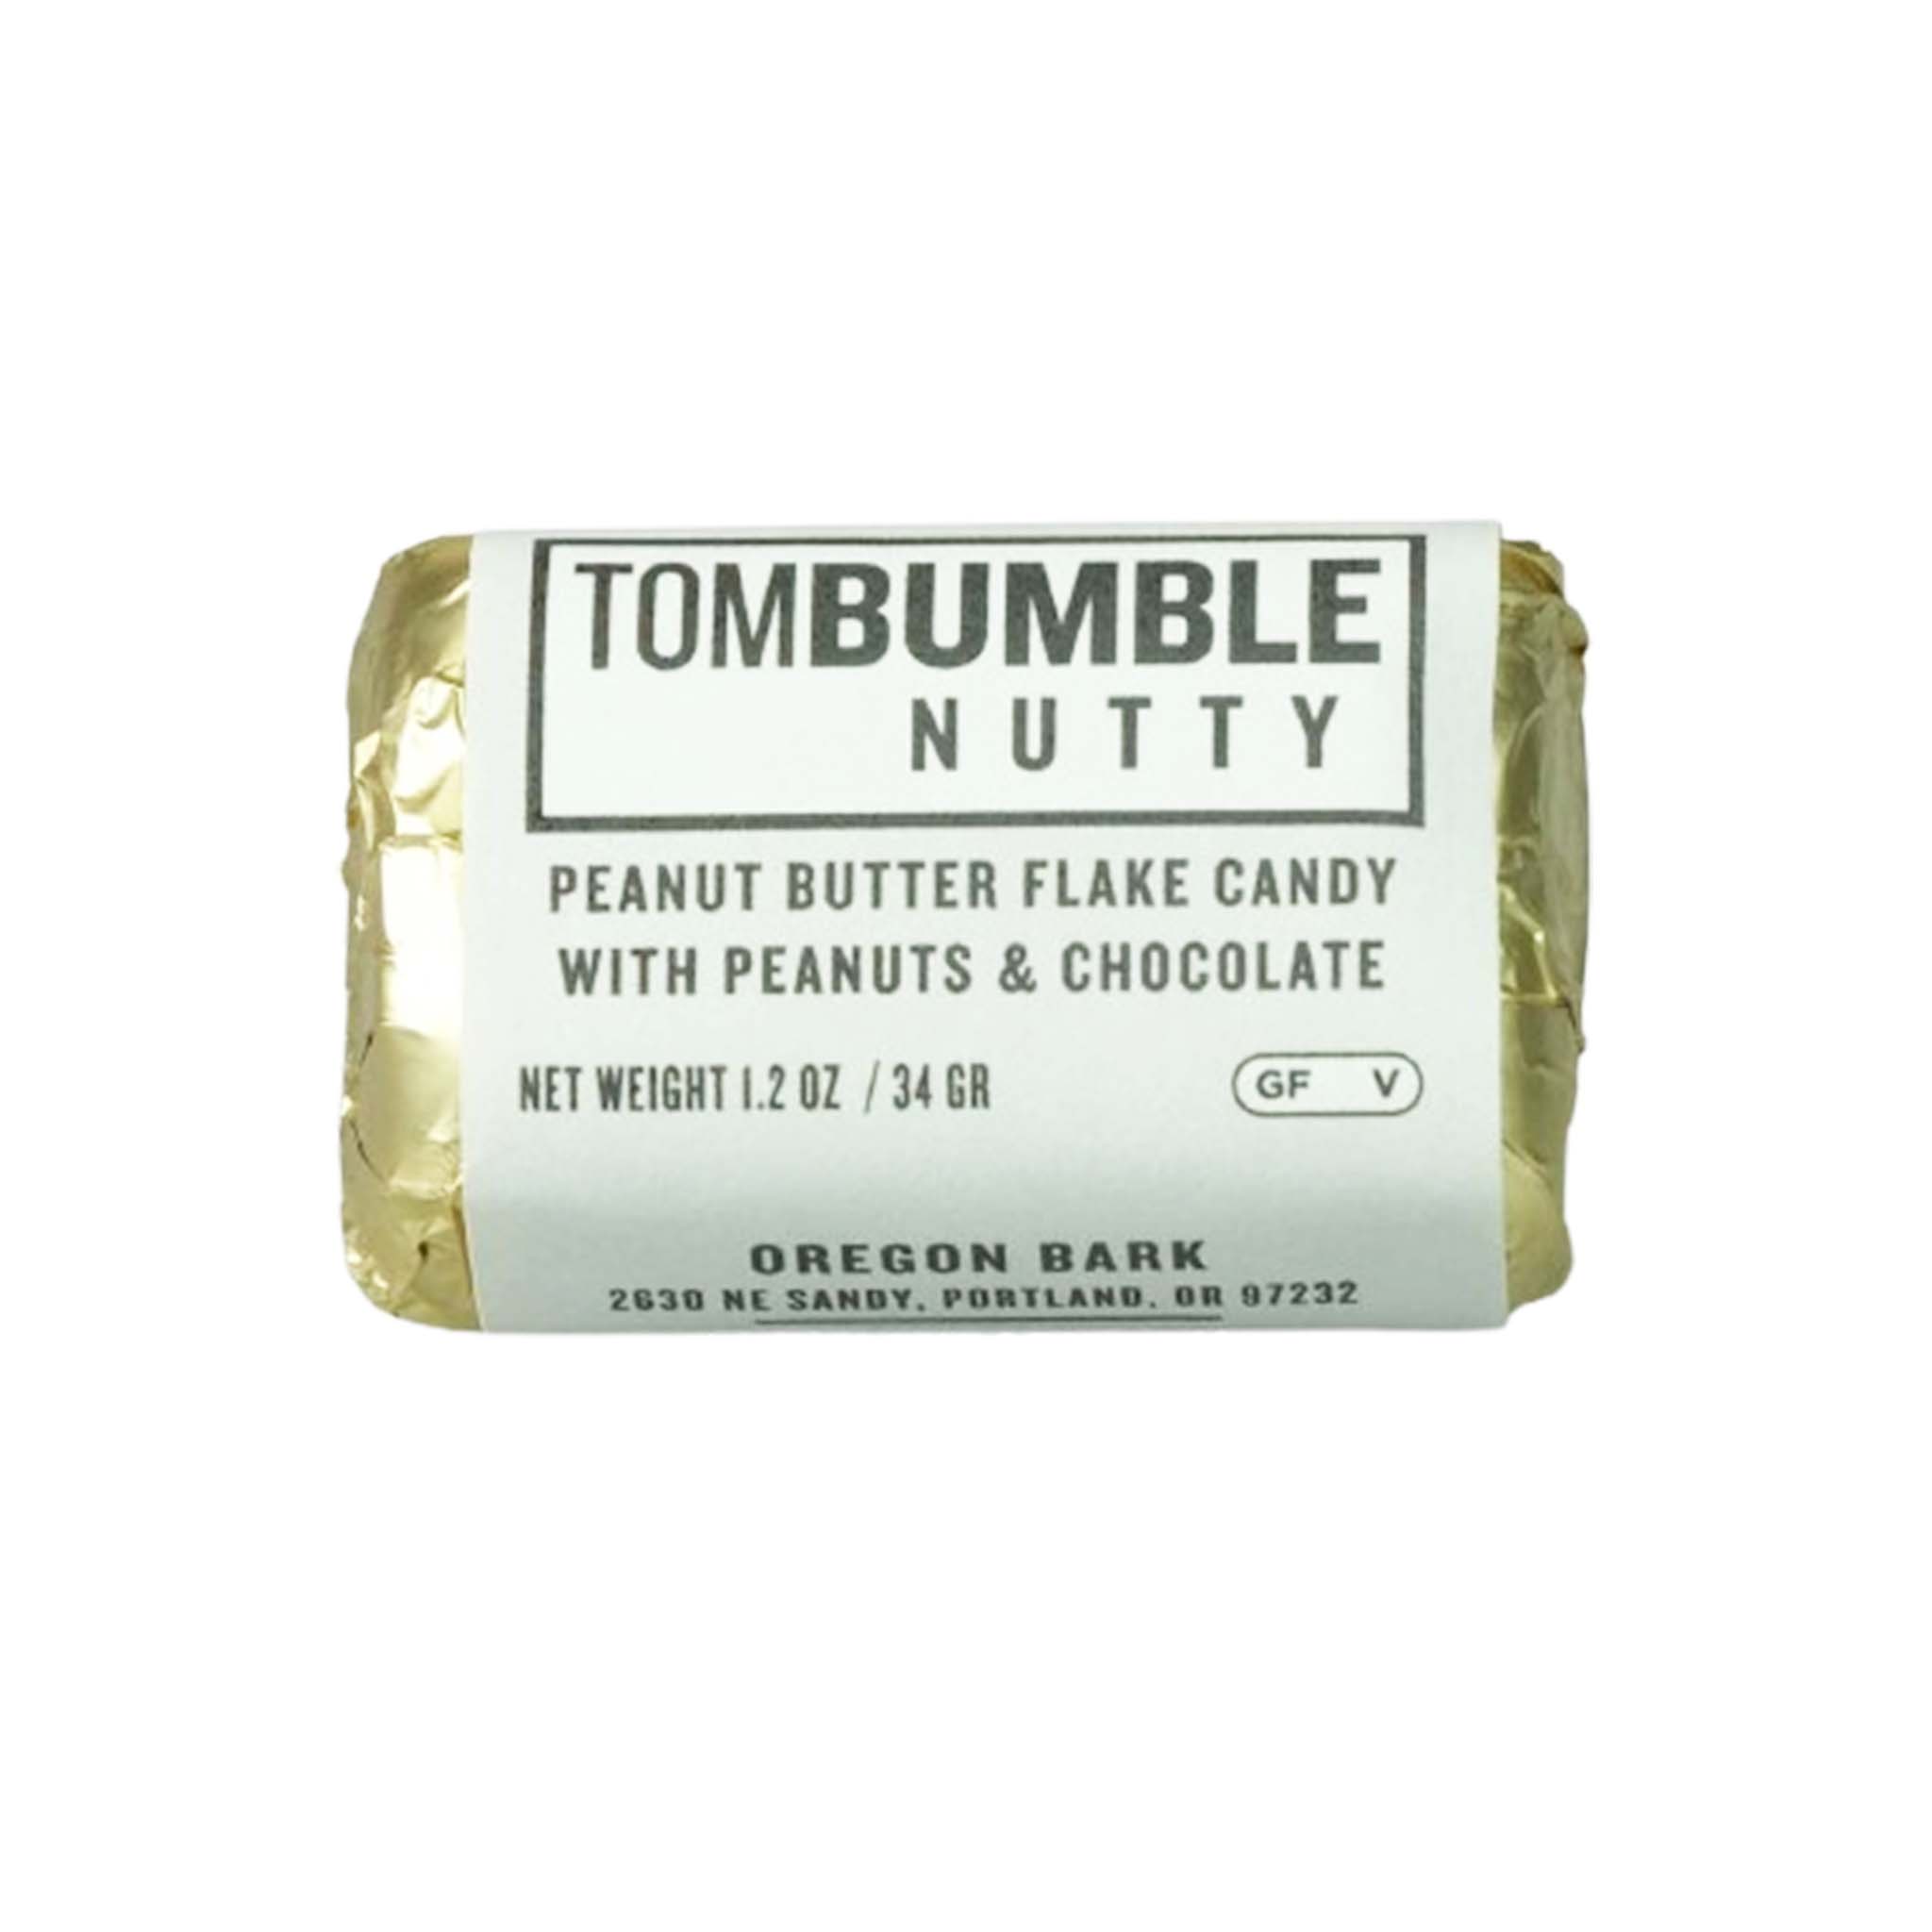 TOM BUMBLE NUTTY CHOCOLATE 34g